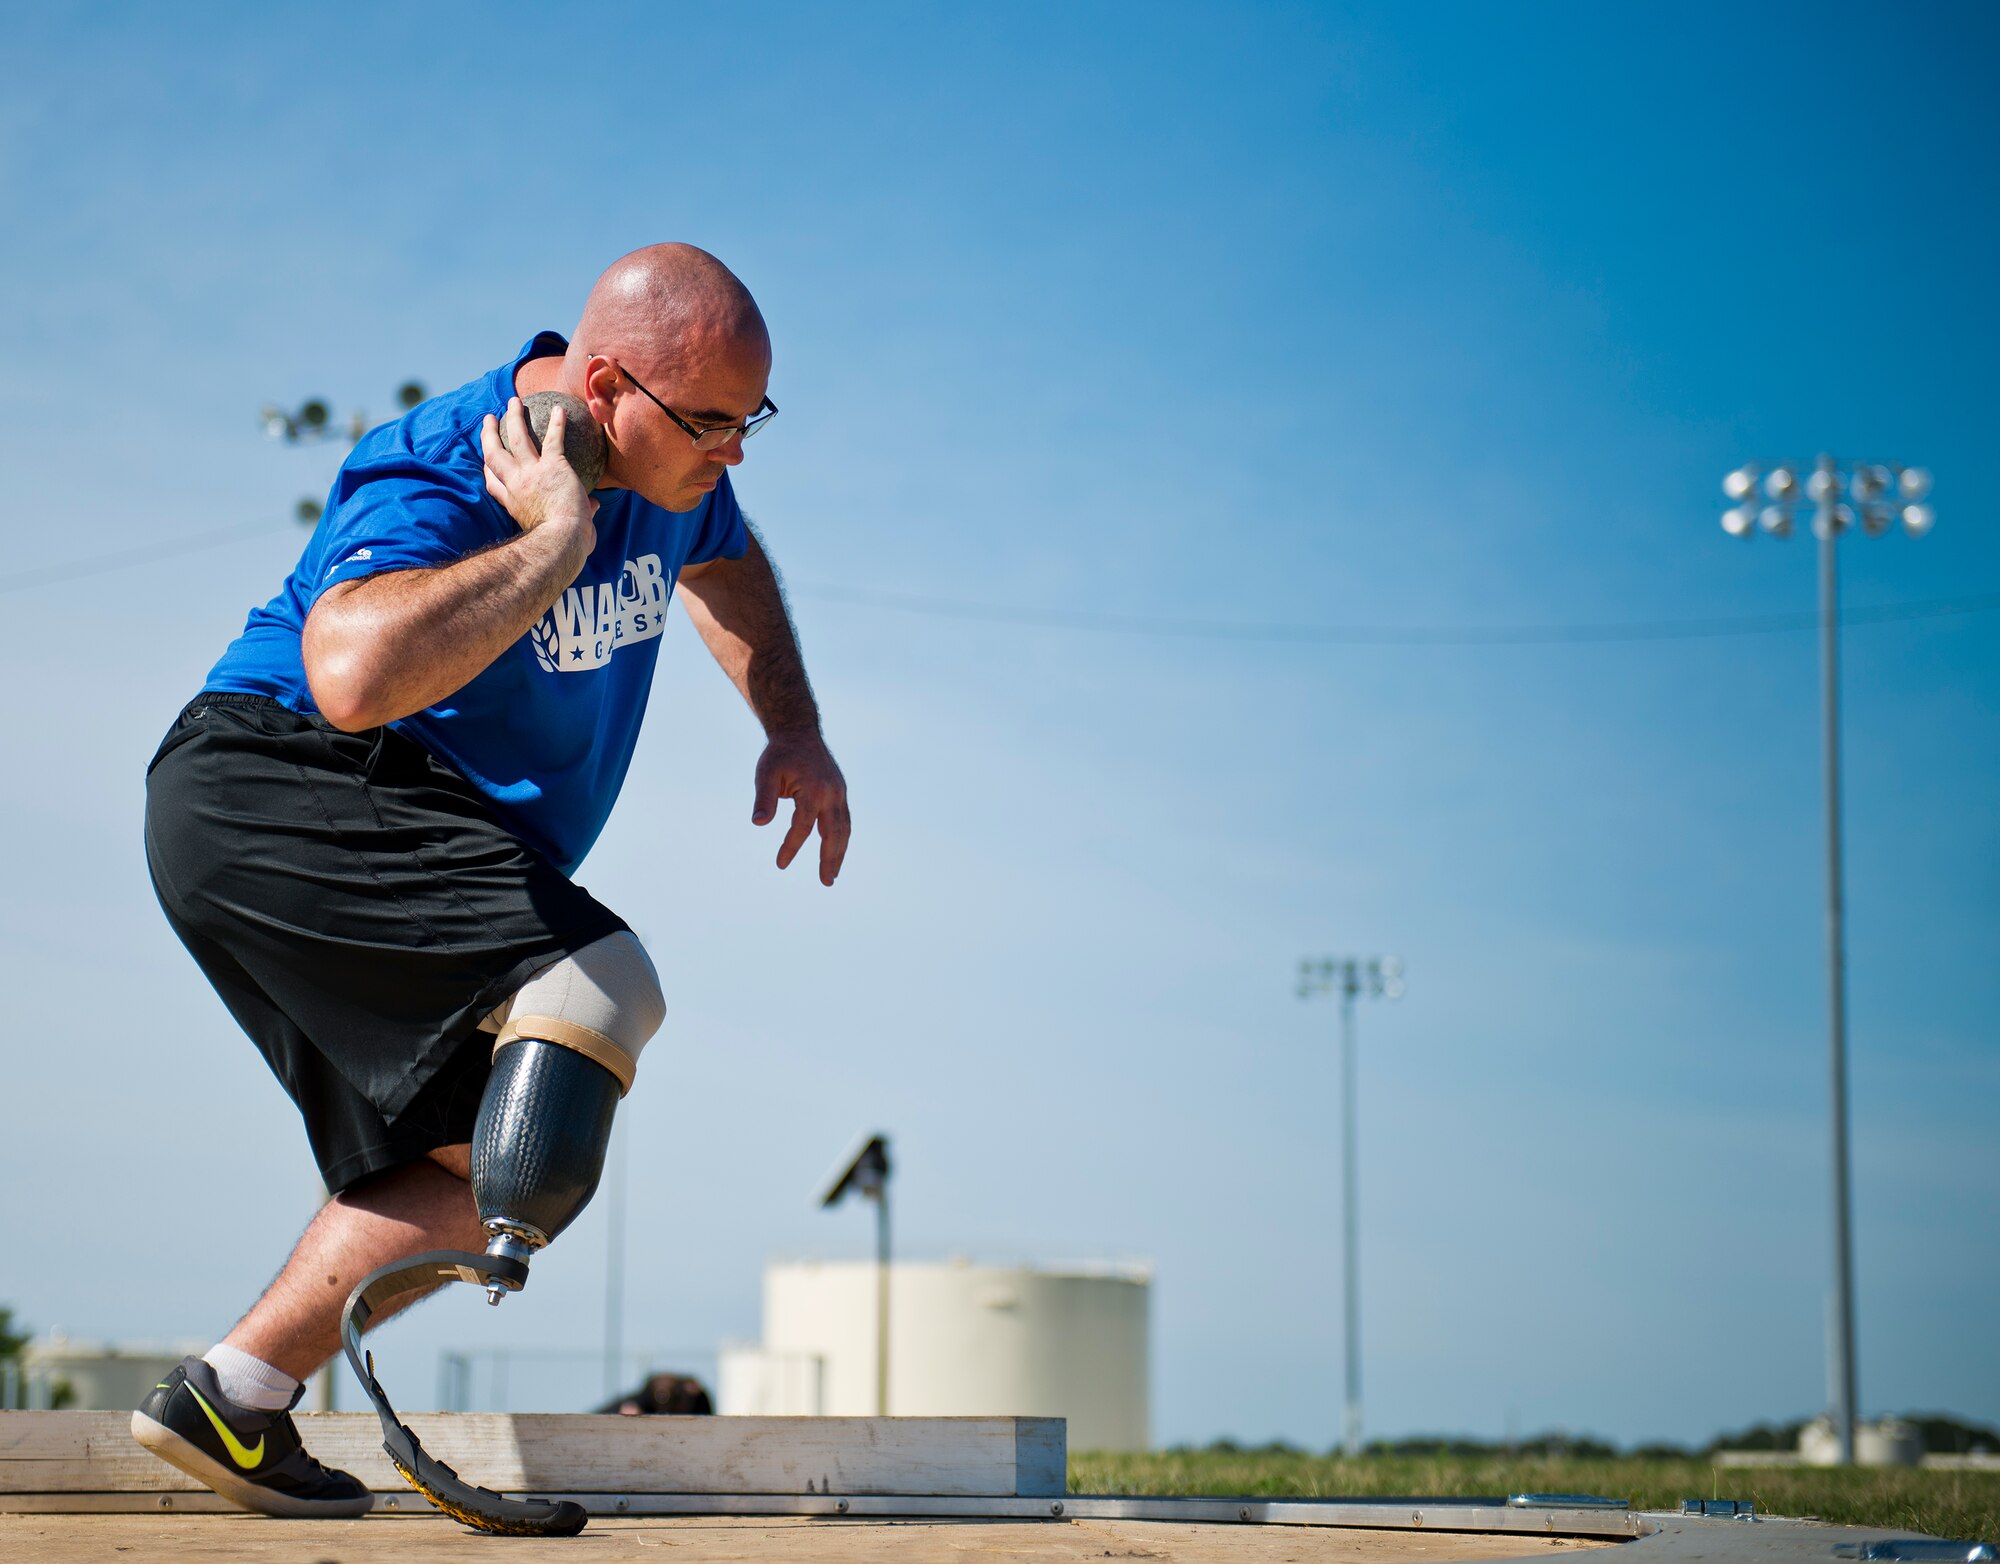 Jason Caswell, an Air Force Wounded Warrior athlete, prepares to launch his throw at a shot put practice during the fourth day of the Warrior Games training camp at Eglin Air Force Base, Fla., April 21. The five-day training camp for the Air Force’s athletes serves as their last practice session before the Warrior Games June 19-28. (U.S. Air Force photo/Samuel King Jr.)